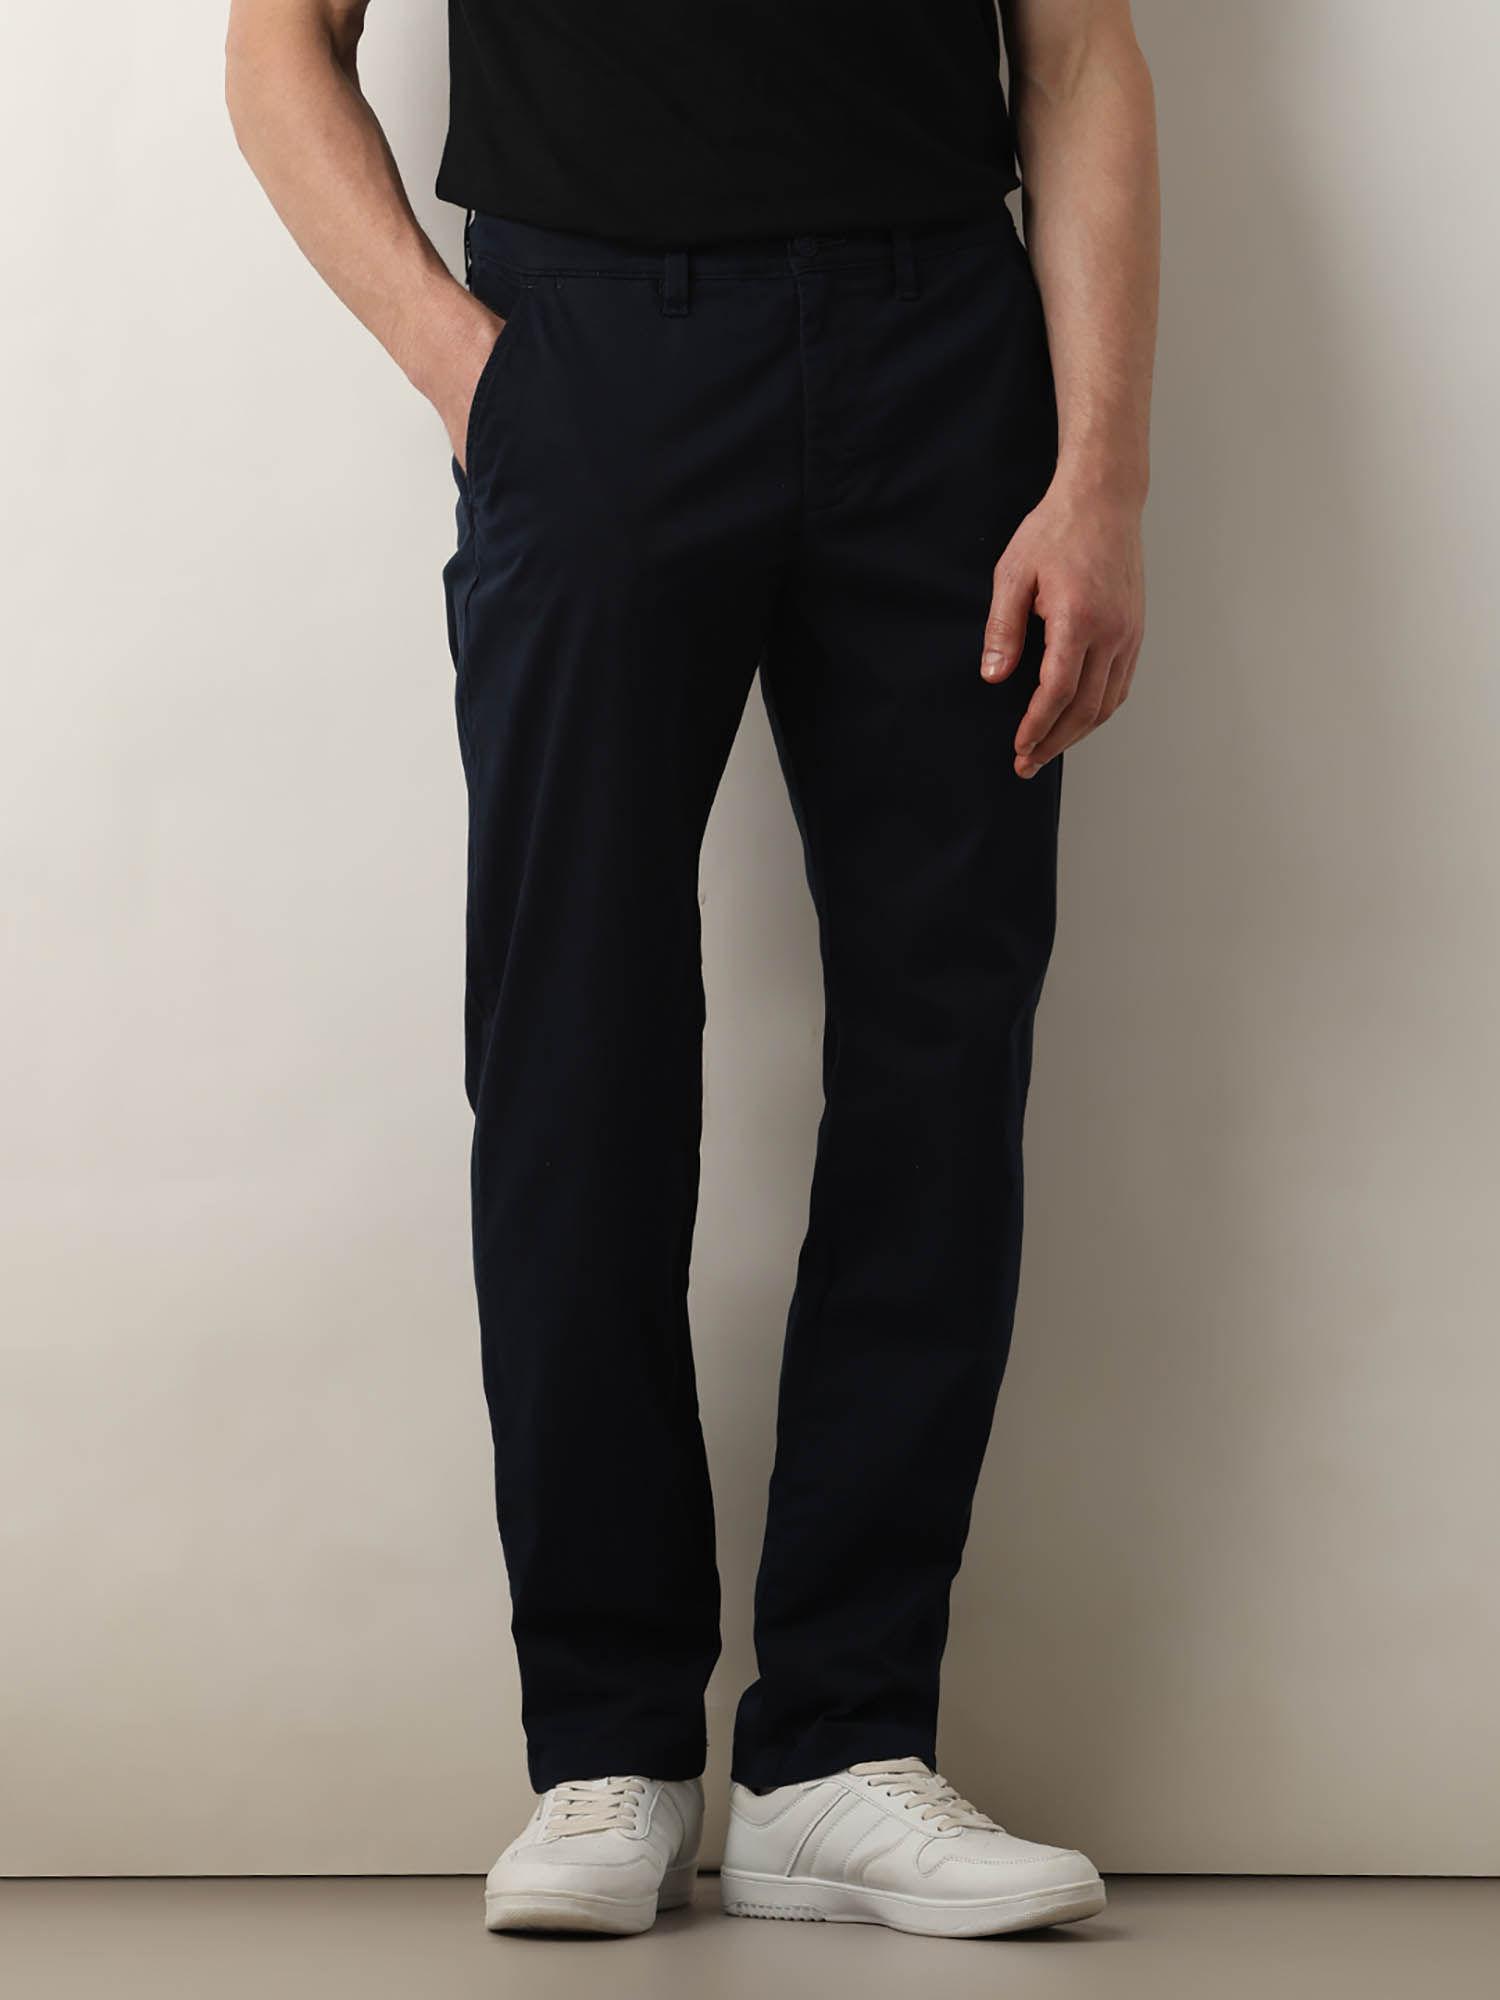 navy blue mid rise slim fit chinos